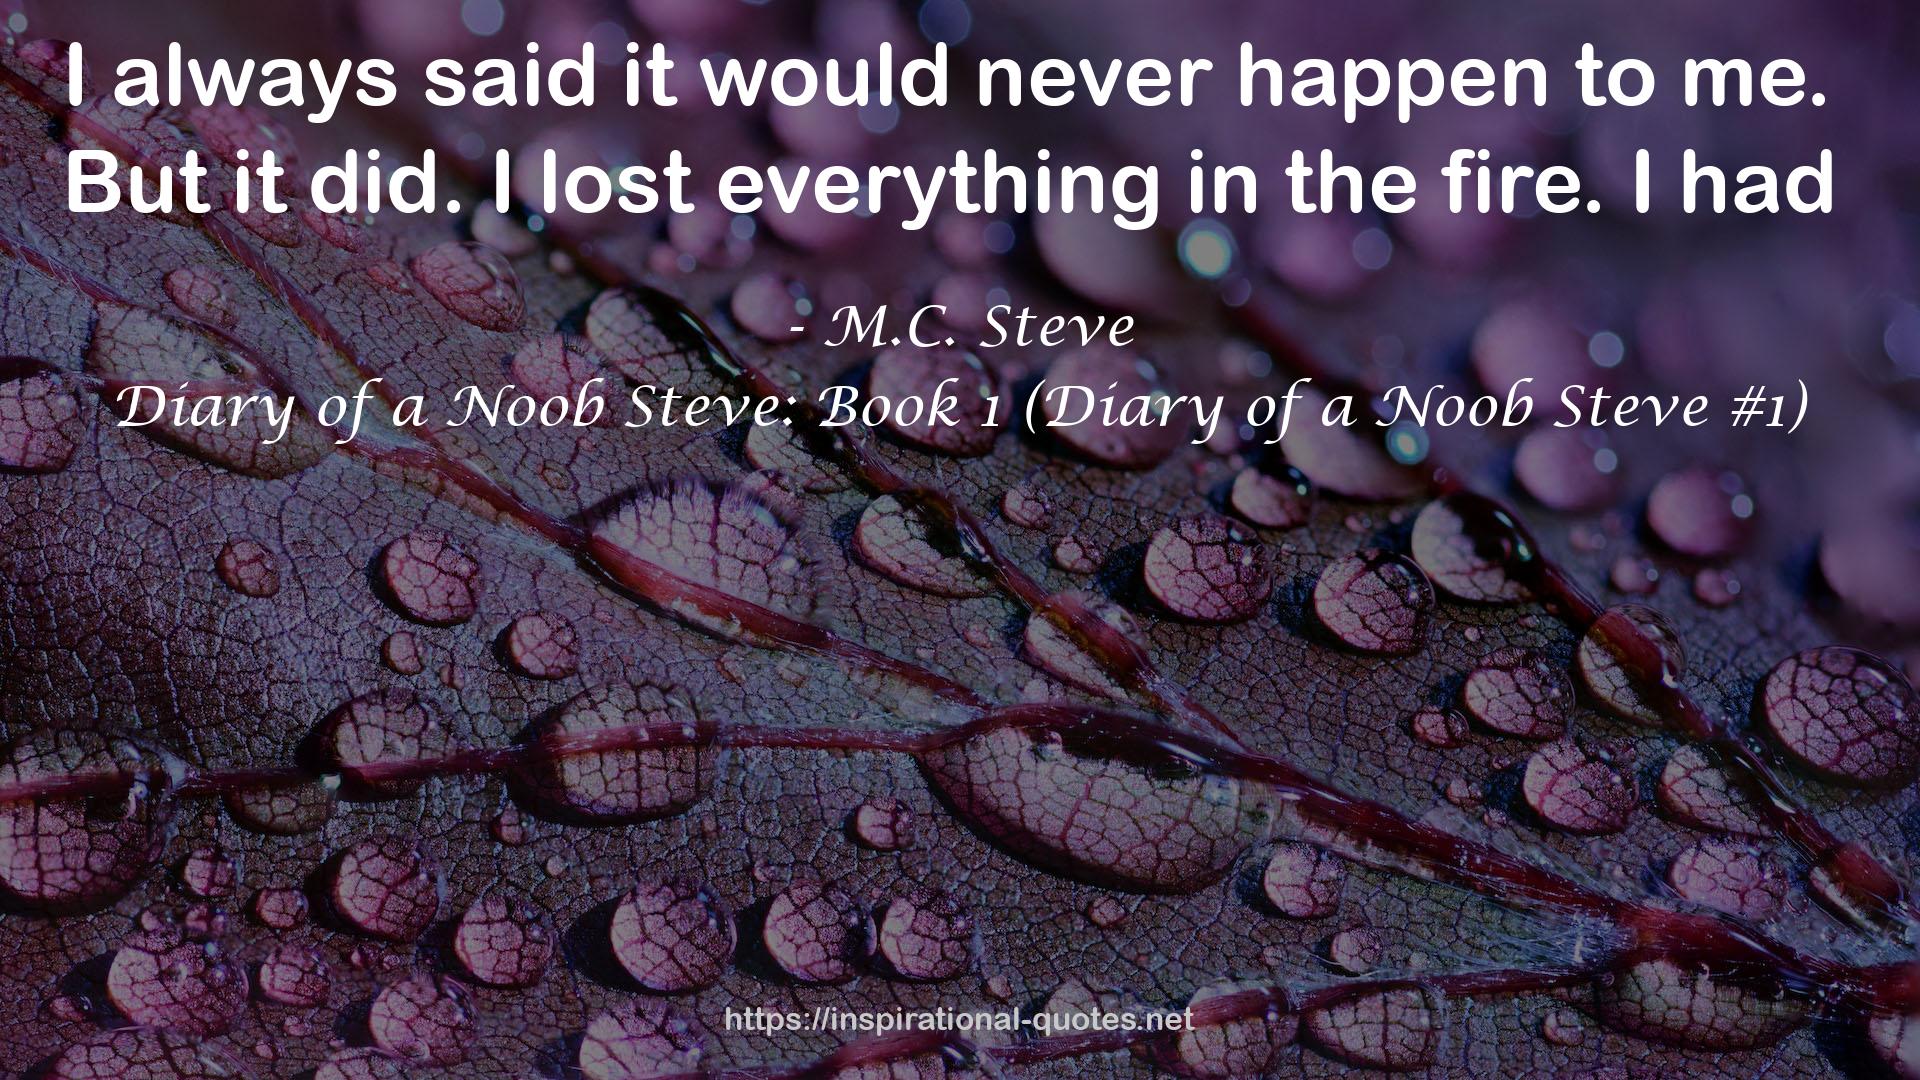 Diary of a Noob Steve: Book 1 (Diary of a Noob Steve #1) QUOTES